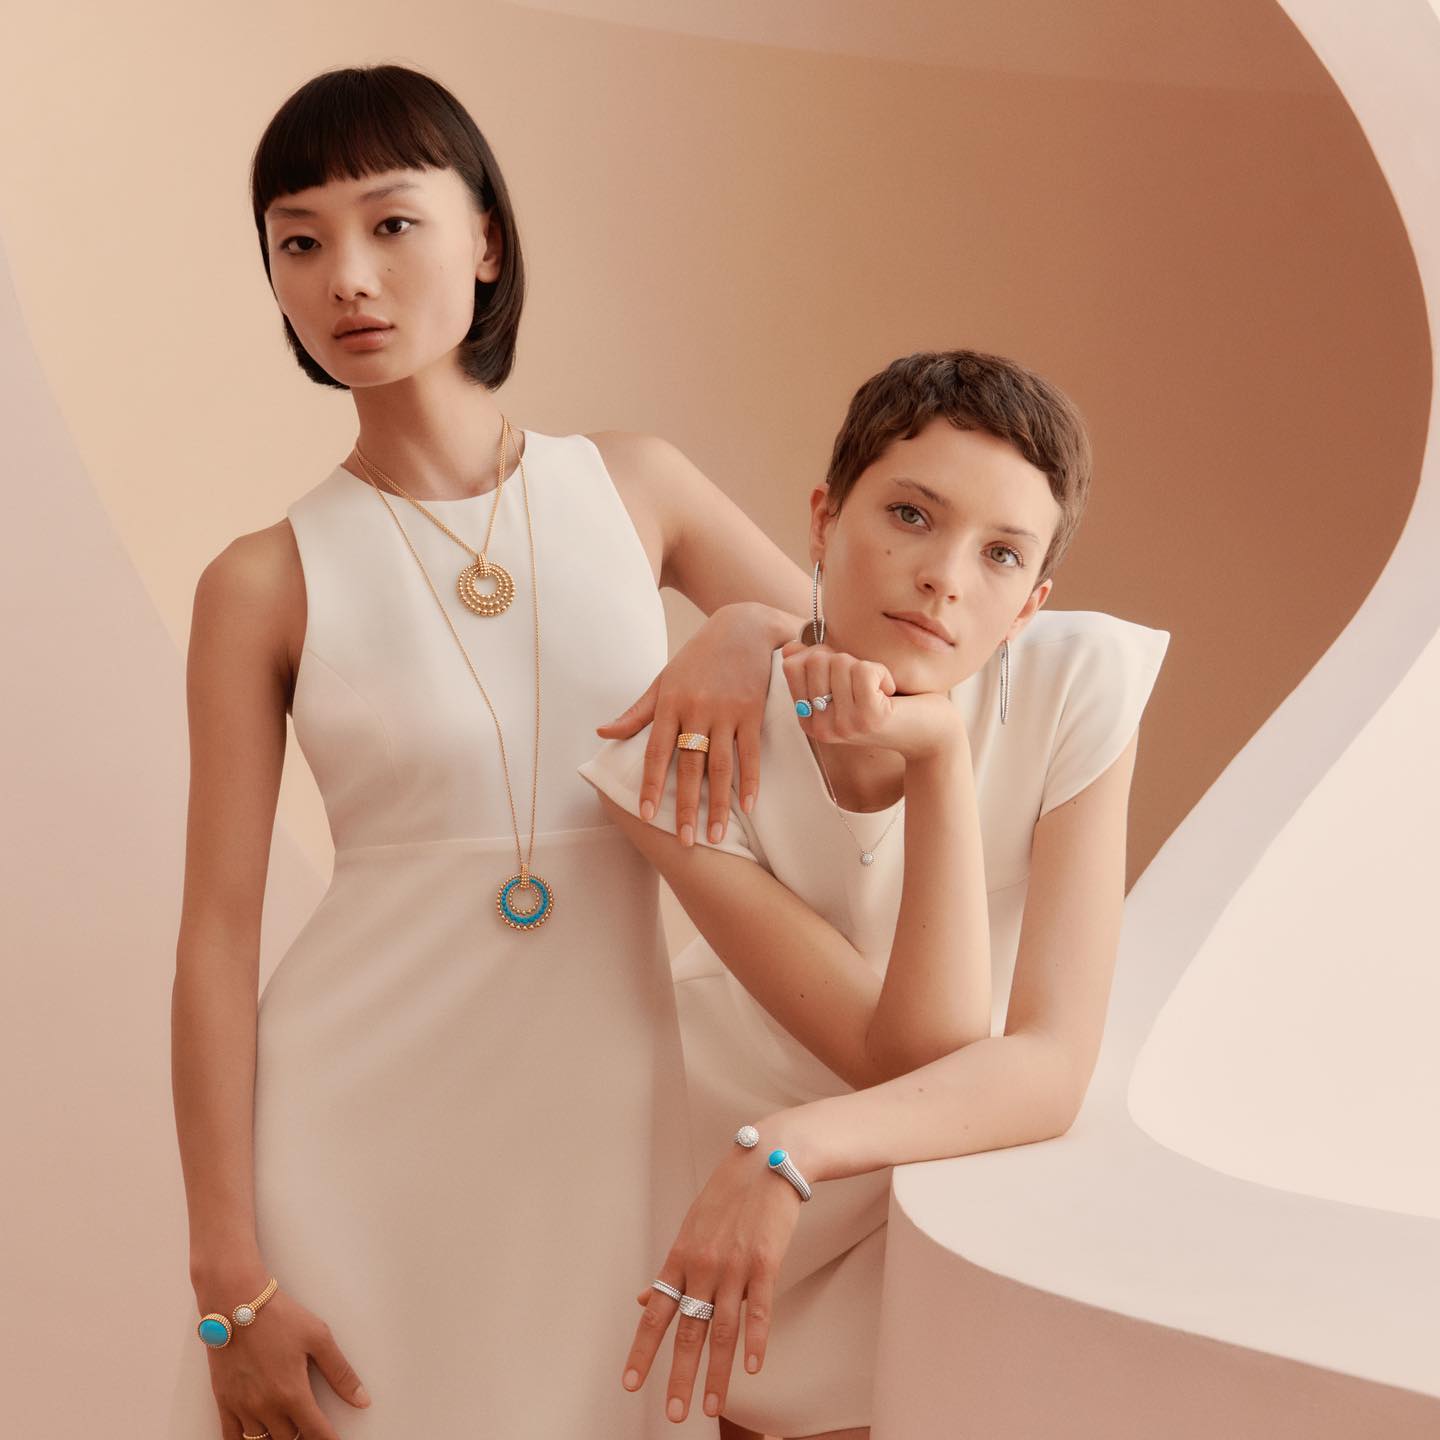 Fourteen years in and Van Cleef & Arpels has finally thought fit to add a #watch line to its much-loved #Perlée jewellery collection, which has also expanded to include open bangles, small and large pendants, earrings as well as an array of rings. Of course, all feature VC&A’s signature #vintage gold #beading, as well as a tasteful pop of colour. We reckon there are a number of pieces worth adding  to your wish list here. Check them out.

Credits: Perlée ©Van Cleef & Arpels Photography by Estelle Hanania, Artistic Direction by Gaspard Yurkievich & Guido Voss

#OfficialBespoke #VanCleefArpels #VanCleef #Perlee #Jewellery #Gold #Diamonds #Luxury #Lifestyle